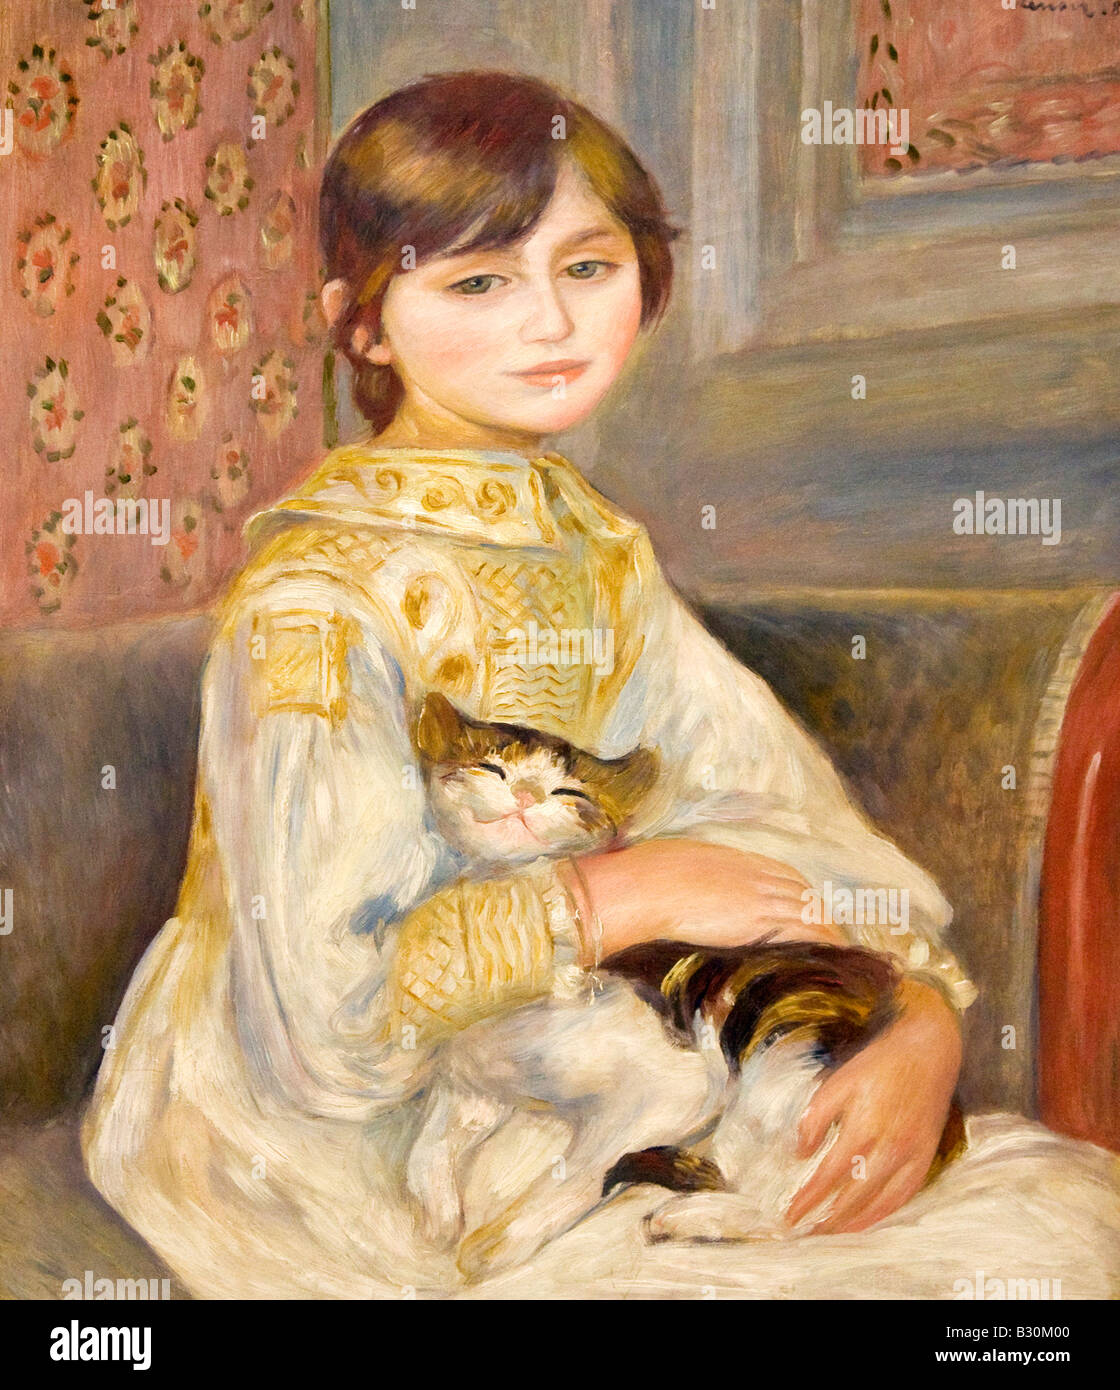 Pierre-Auguste Renoir, Child with Cat, Julie Manet 1887 Musee D Orsay D Orsay Museum and Art Gallery Paris France Europe EU Stock Photo